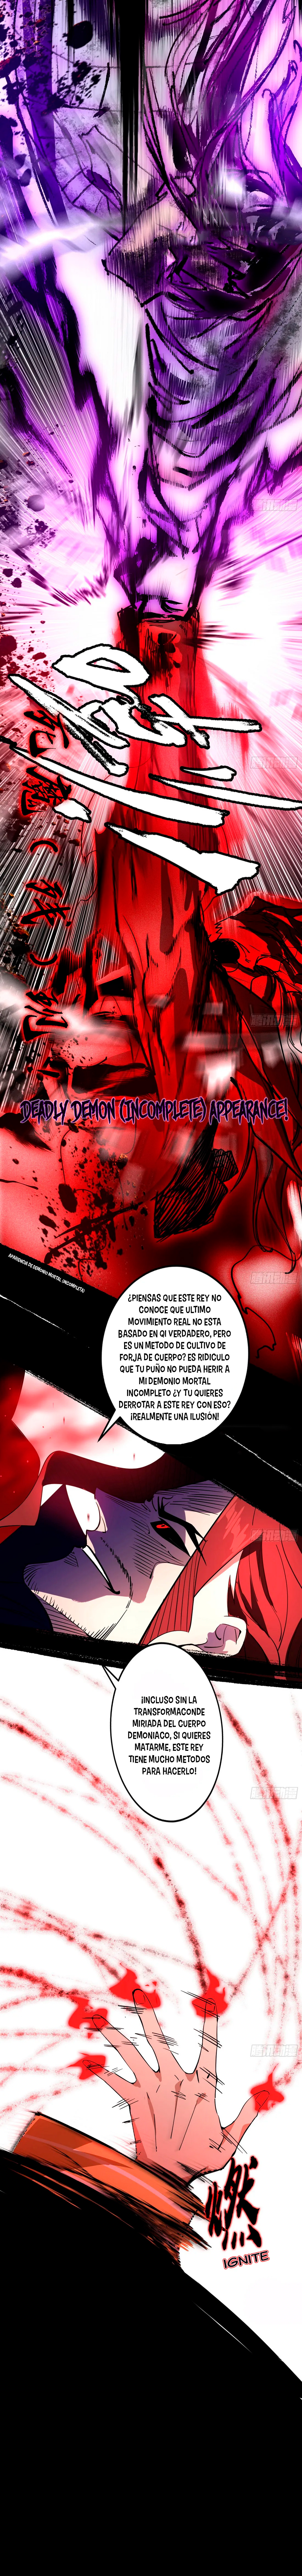 Manga Soy un dios maligno Chapter 308 image number 1